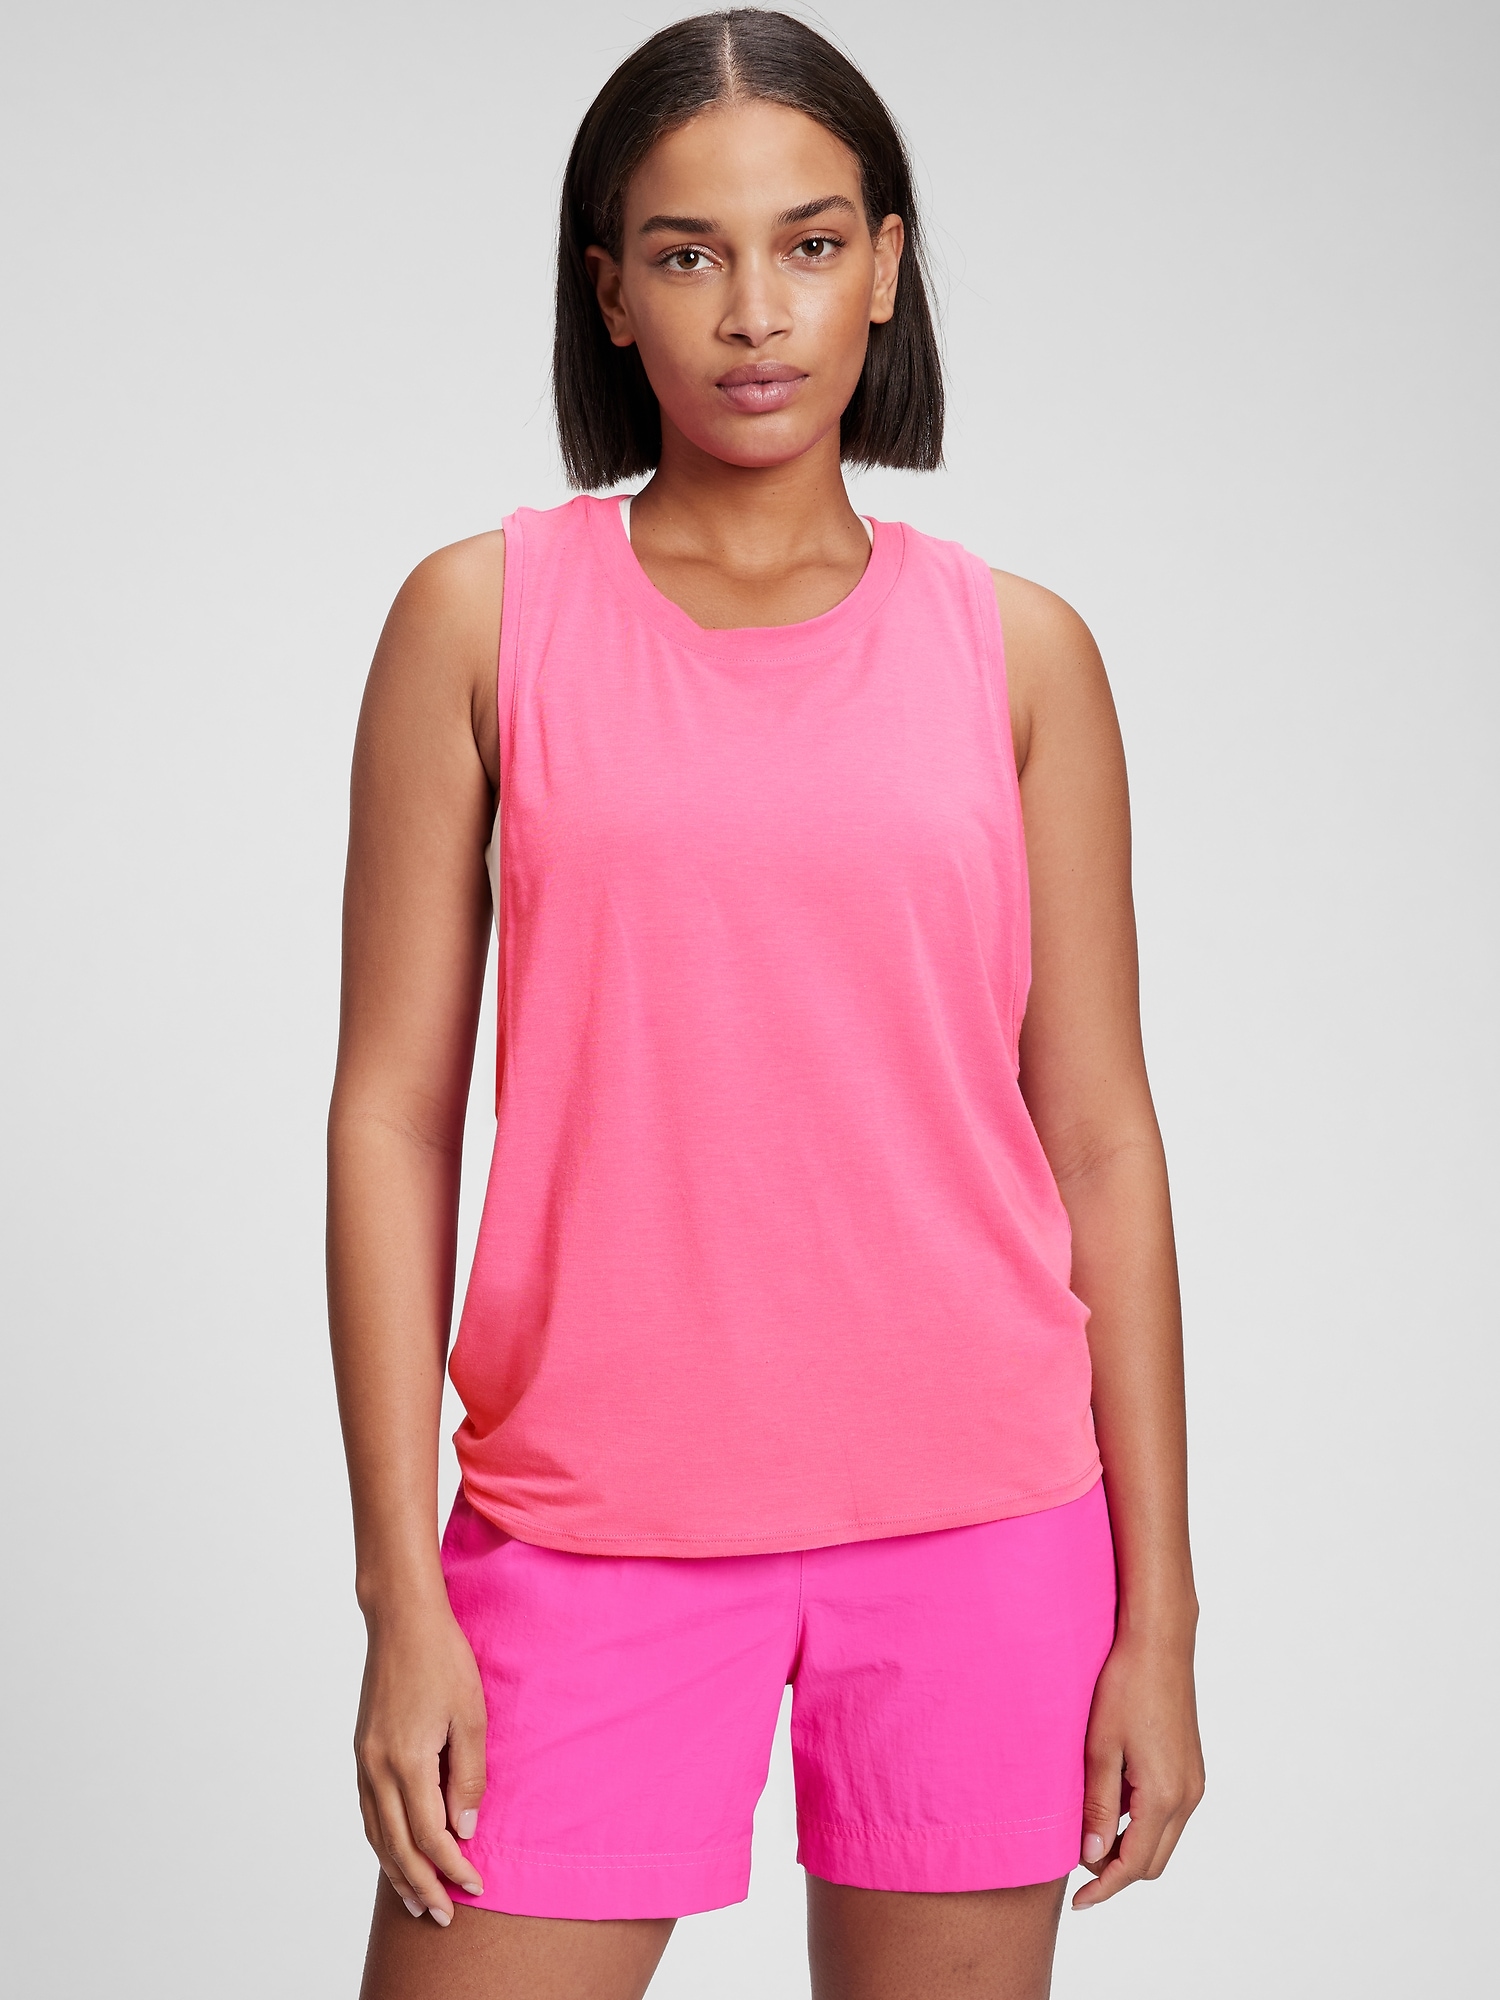 Gap Fit Womens Tank Top With Built In Sports Bra Small